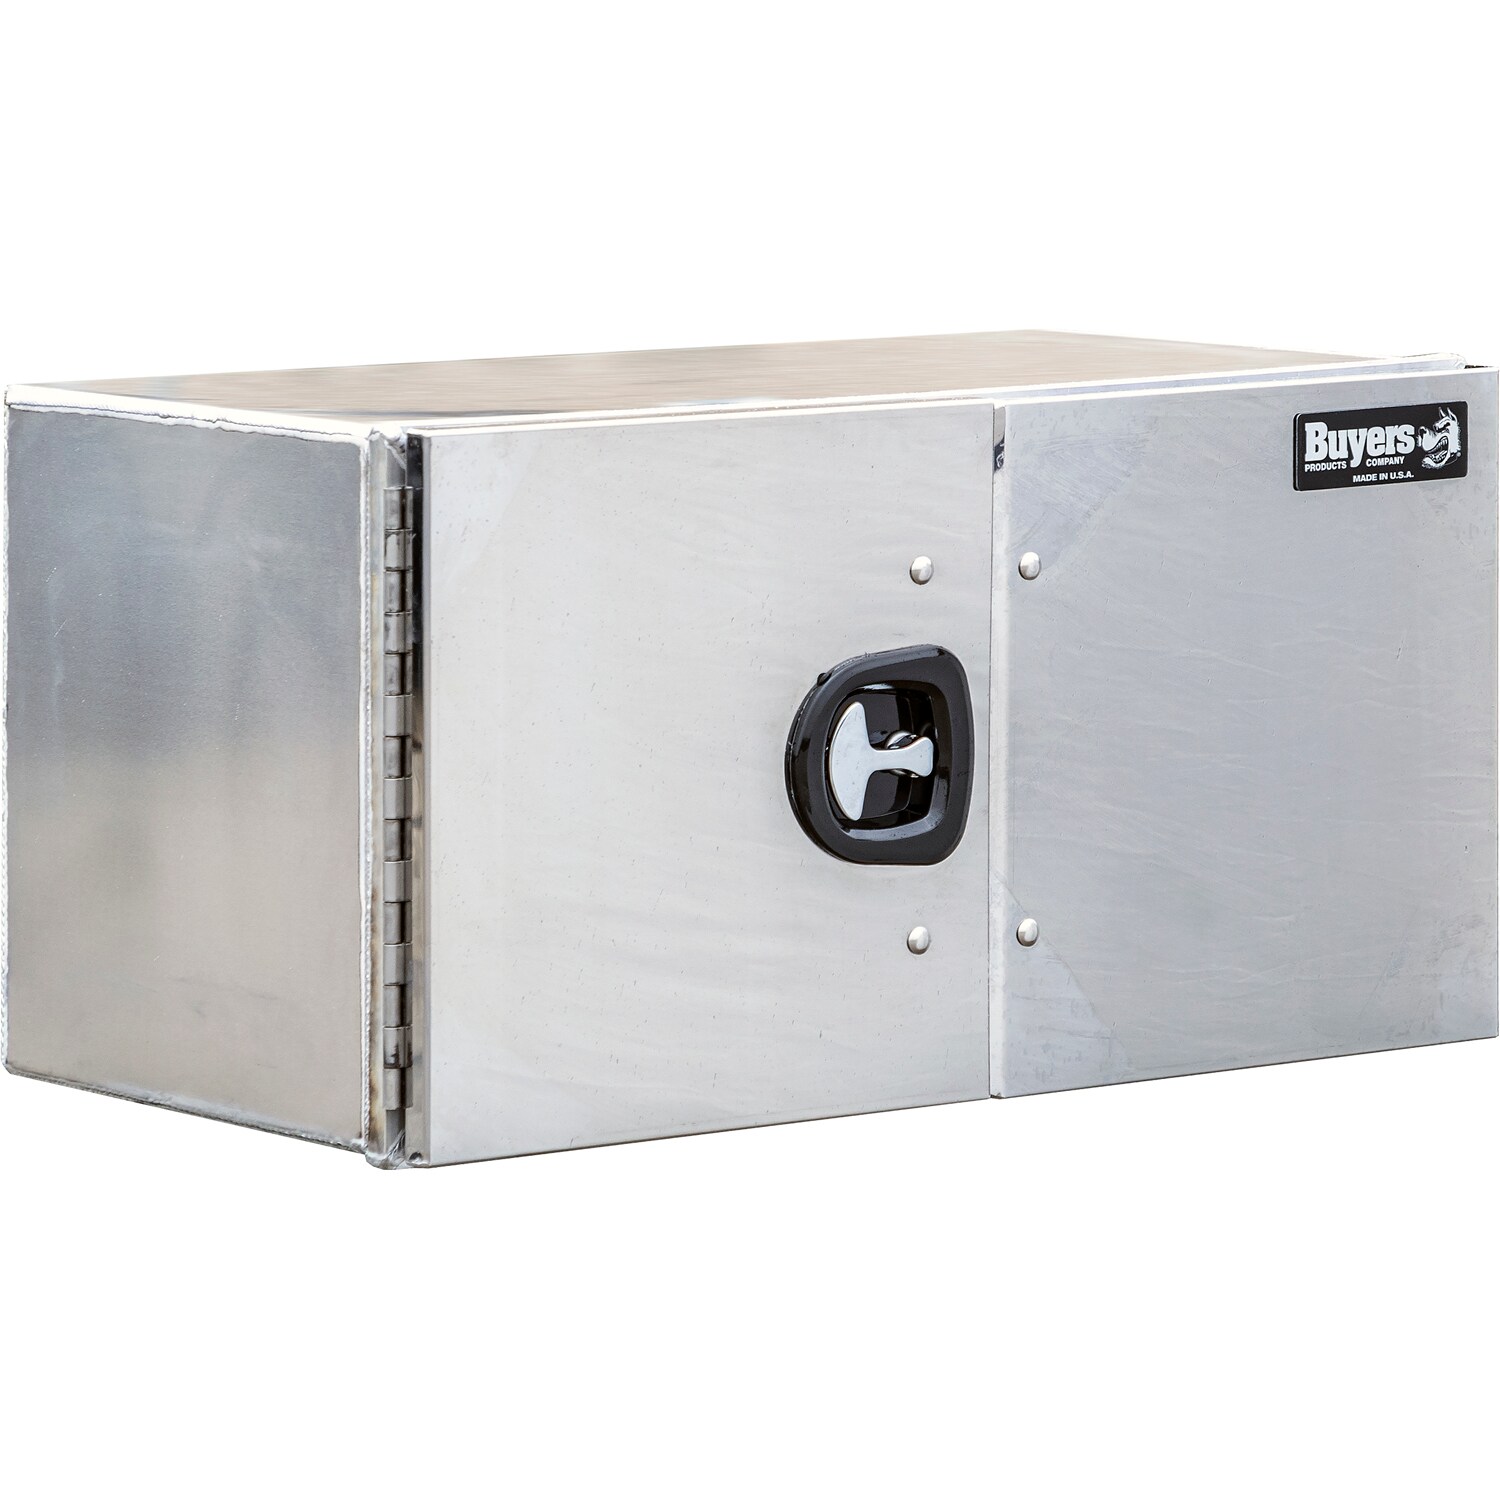 48 Inch Long Truck Tool Boxes at